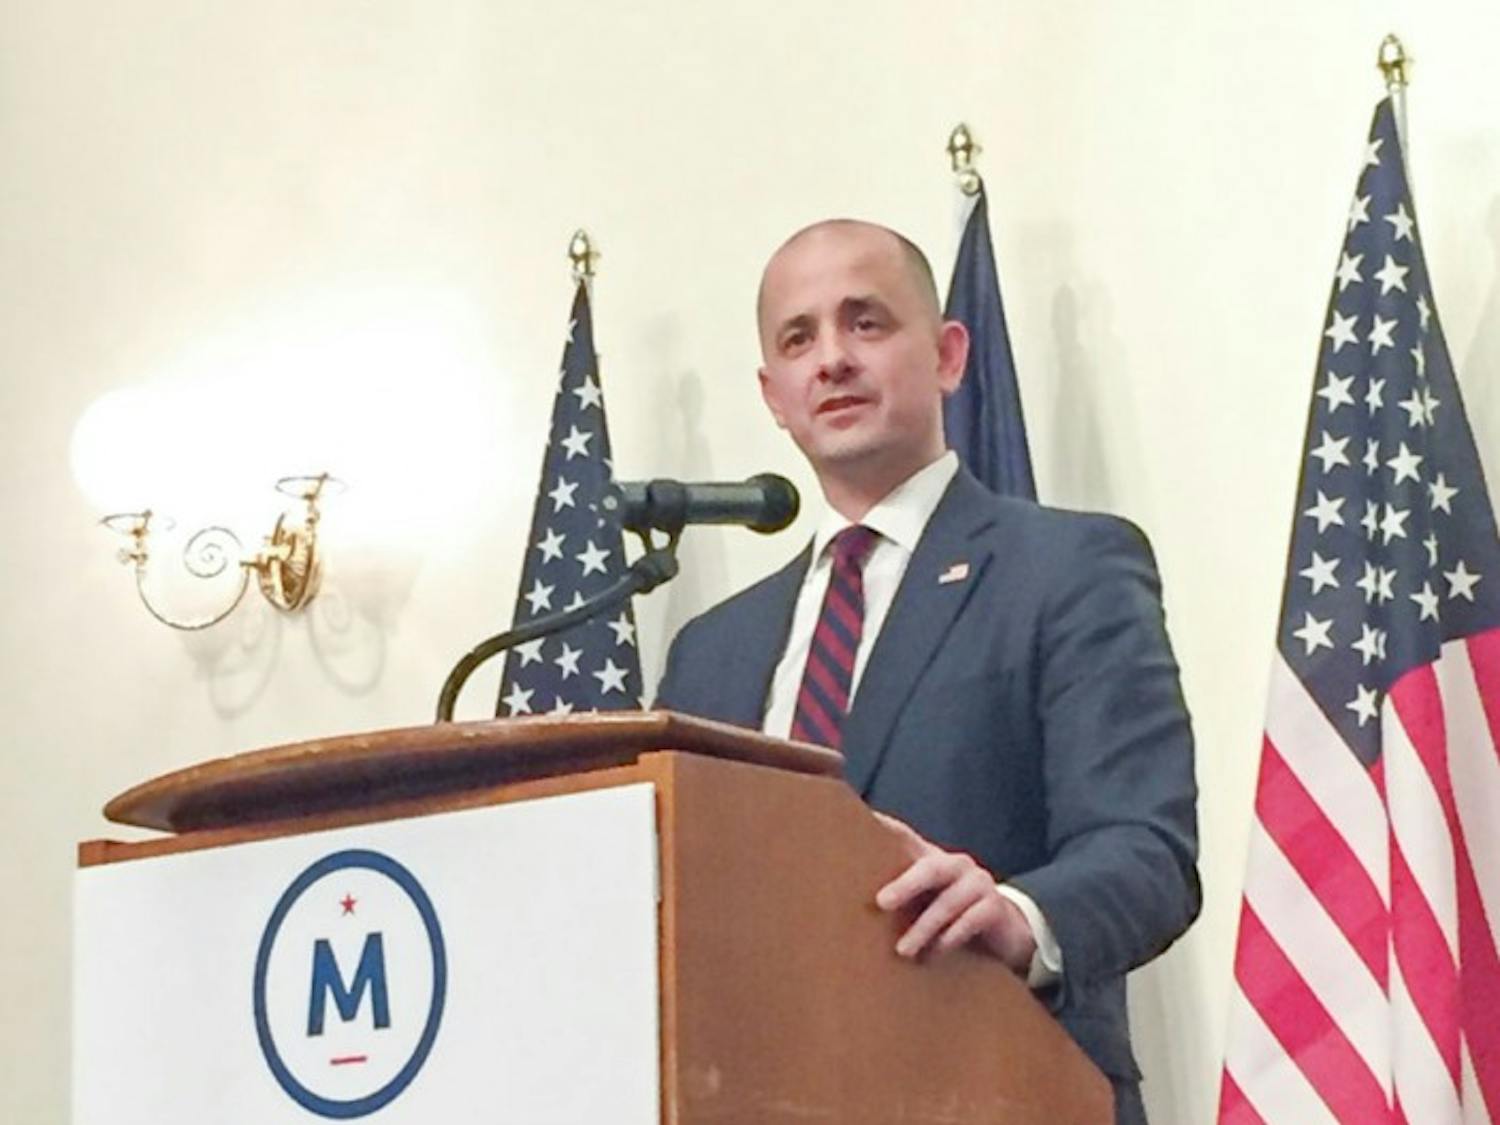 Evan_McMullin_at_Provo_Rally_cropped.jpg